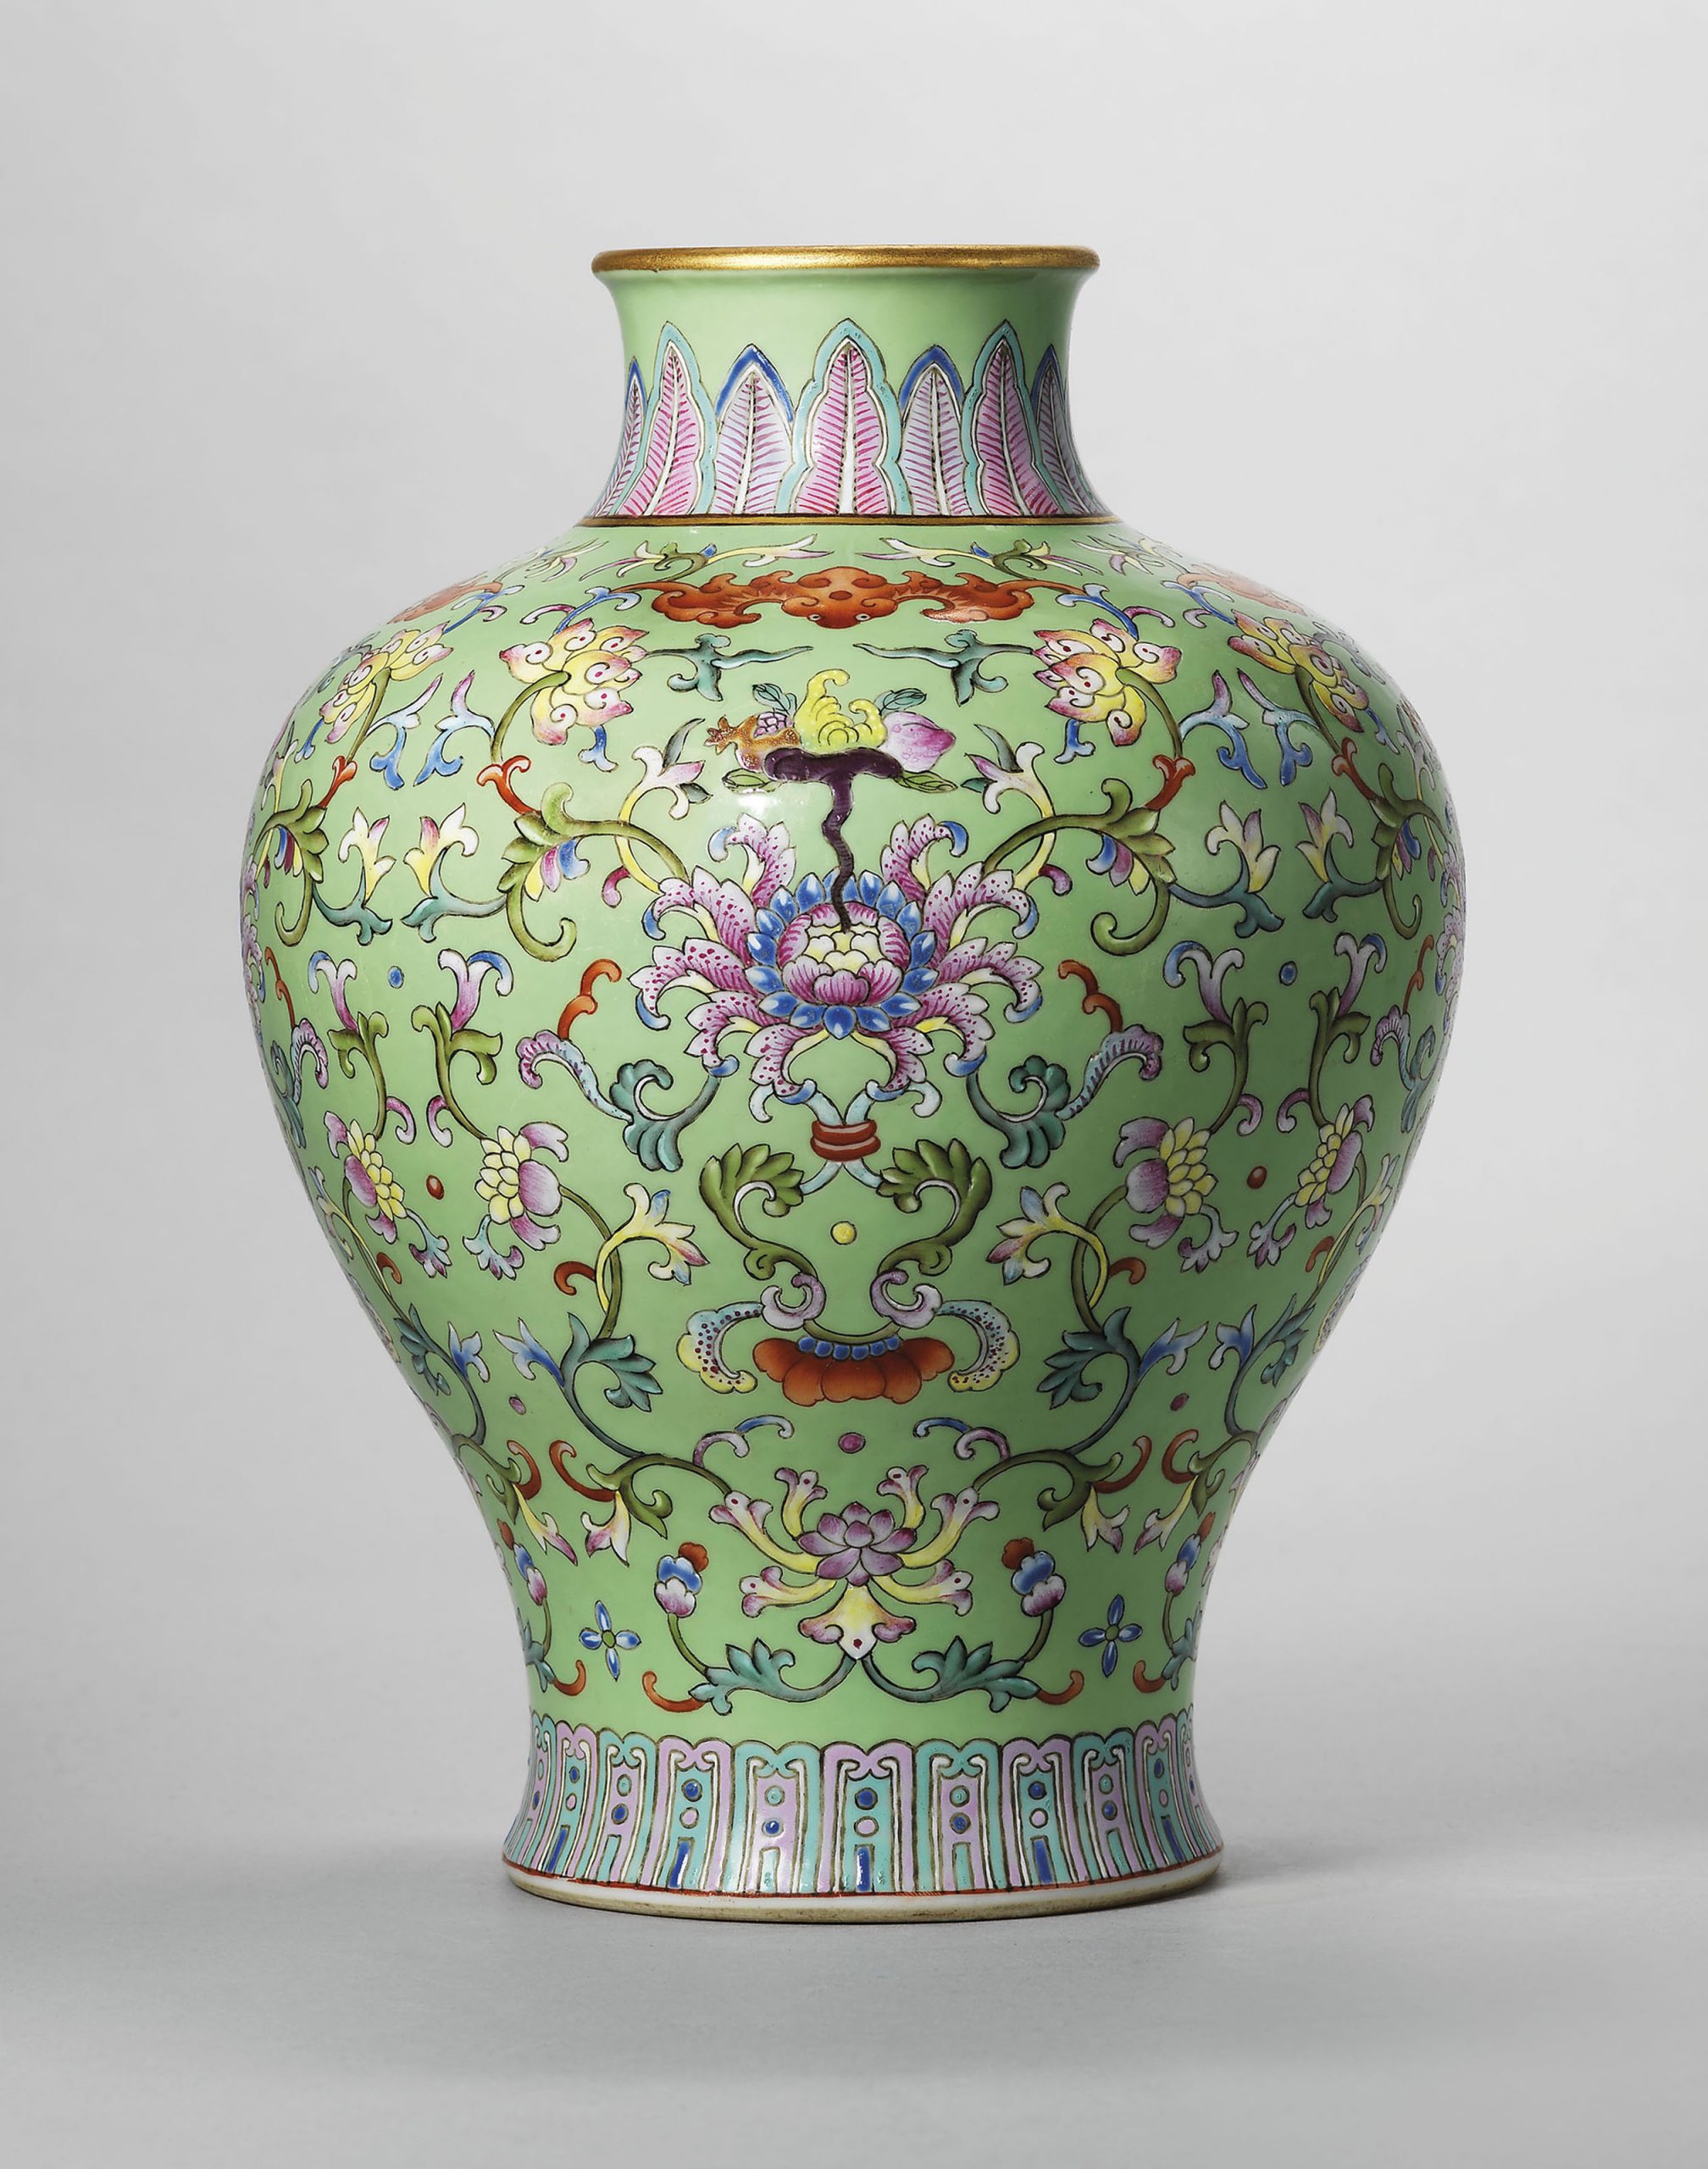 A Guide To The Symbolism Of Flowers On Chinese Ceramics regarding sizing 2520 X 3200